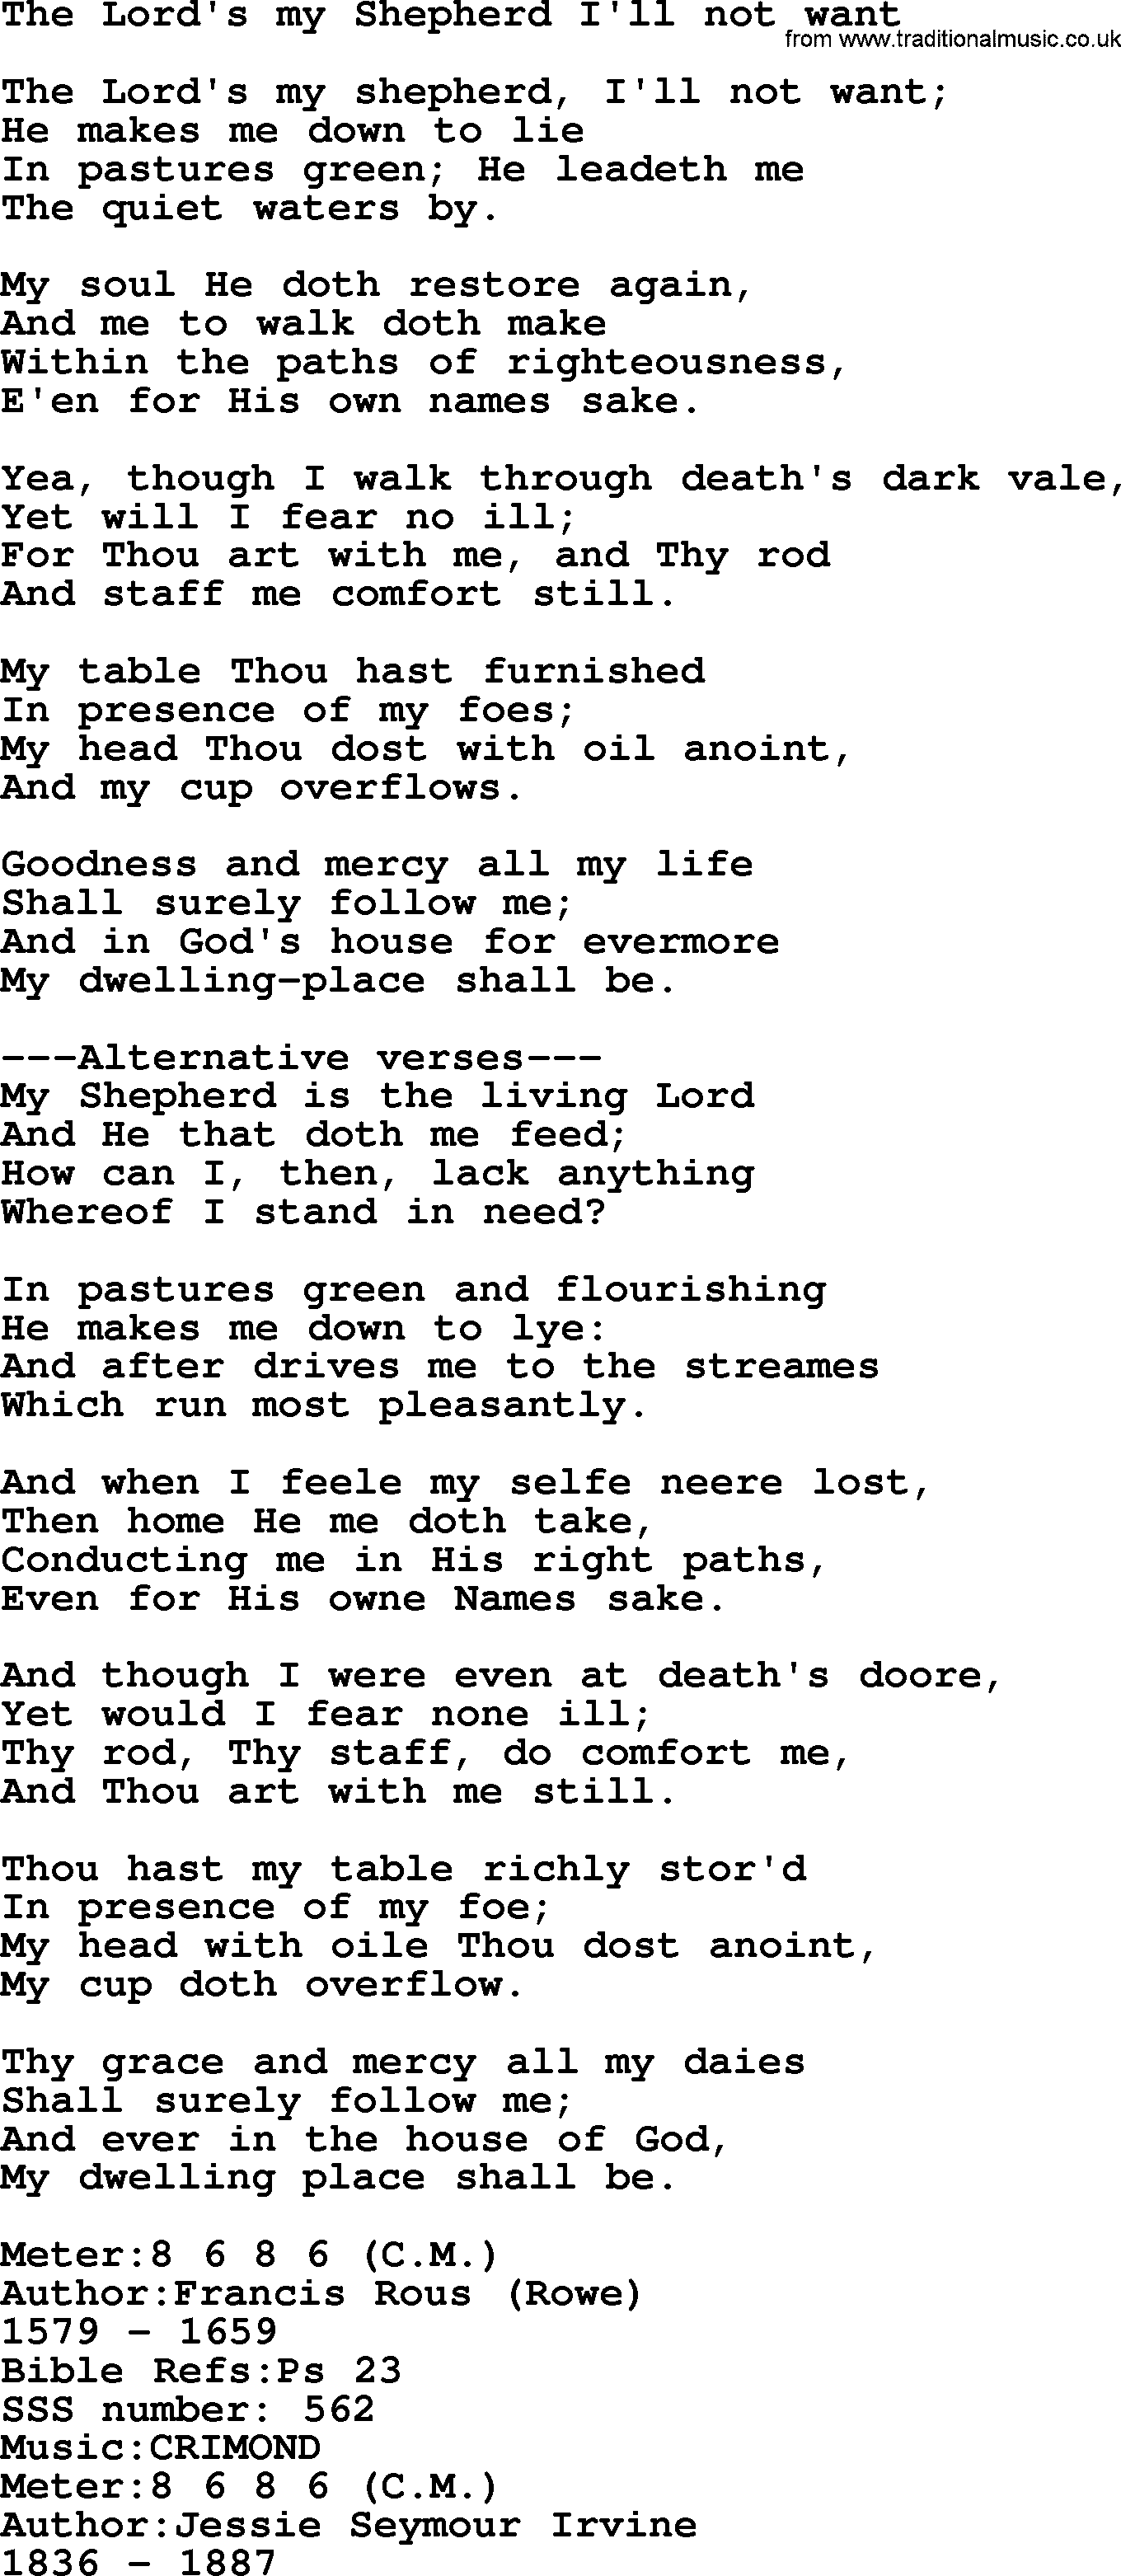 Sacred Songs and Solos complete, 1200 Hymns, title: The Lord's My Shepherd I'll Not Want, lyrics and PDF